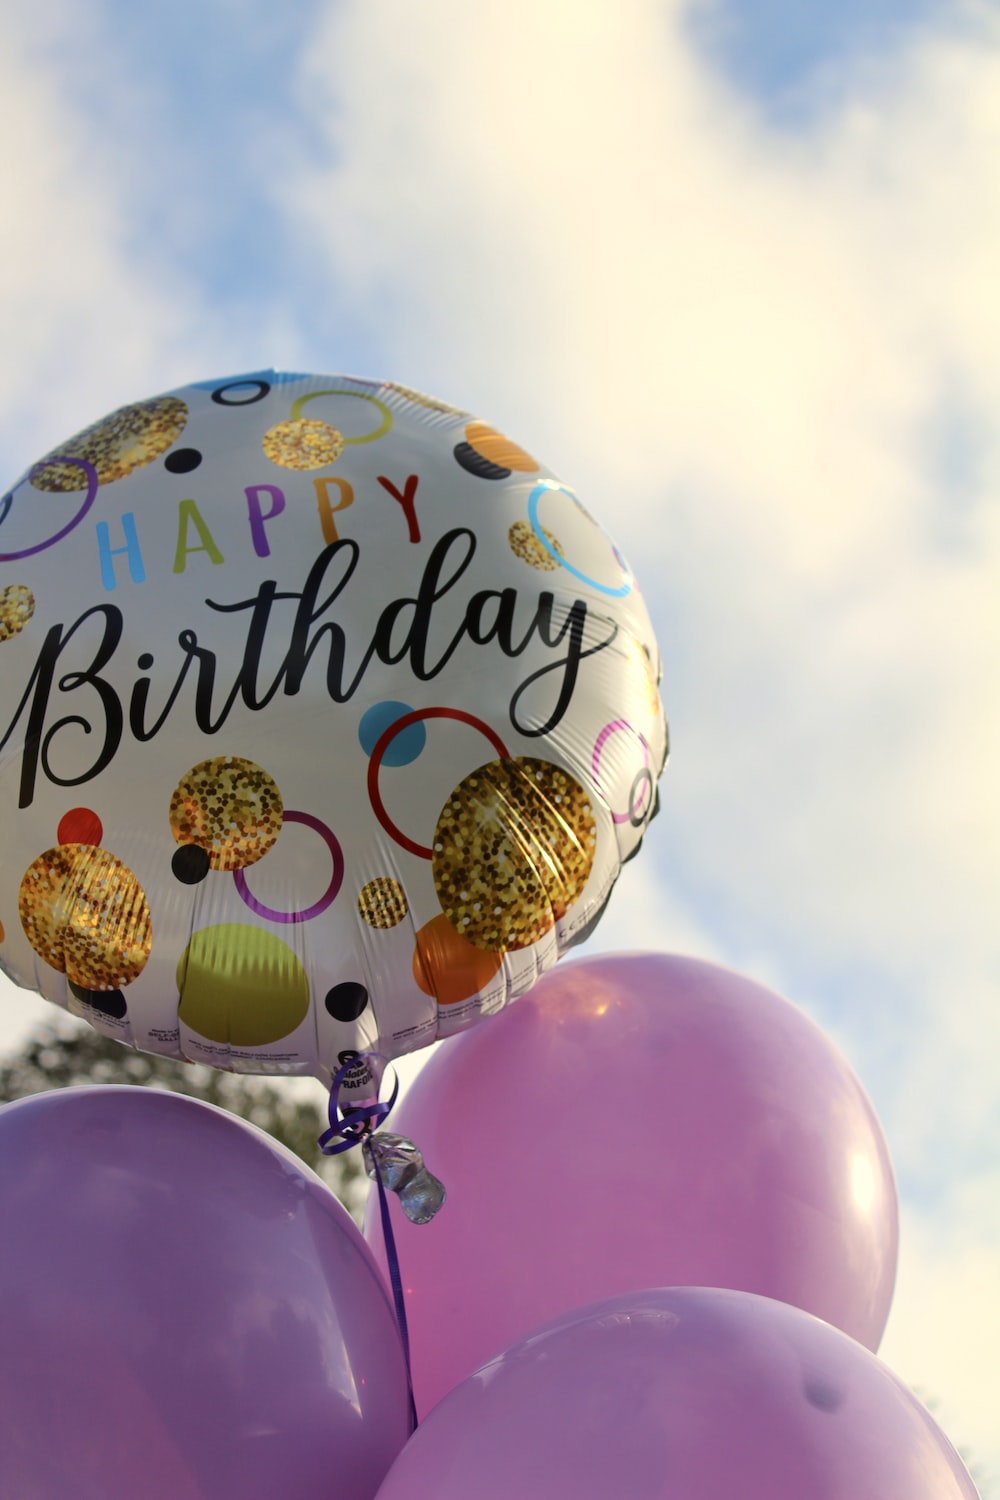 Birthday Balloons Picture. Download Free Image